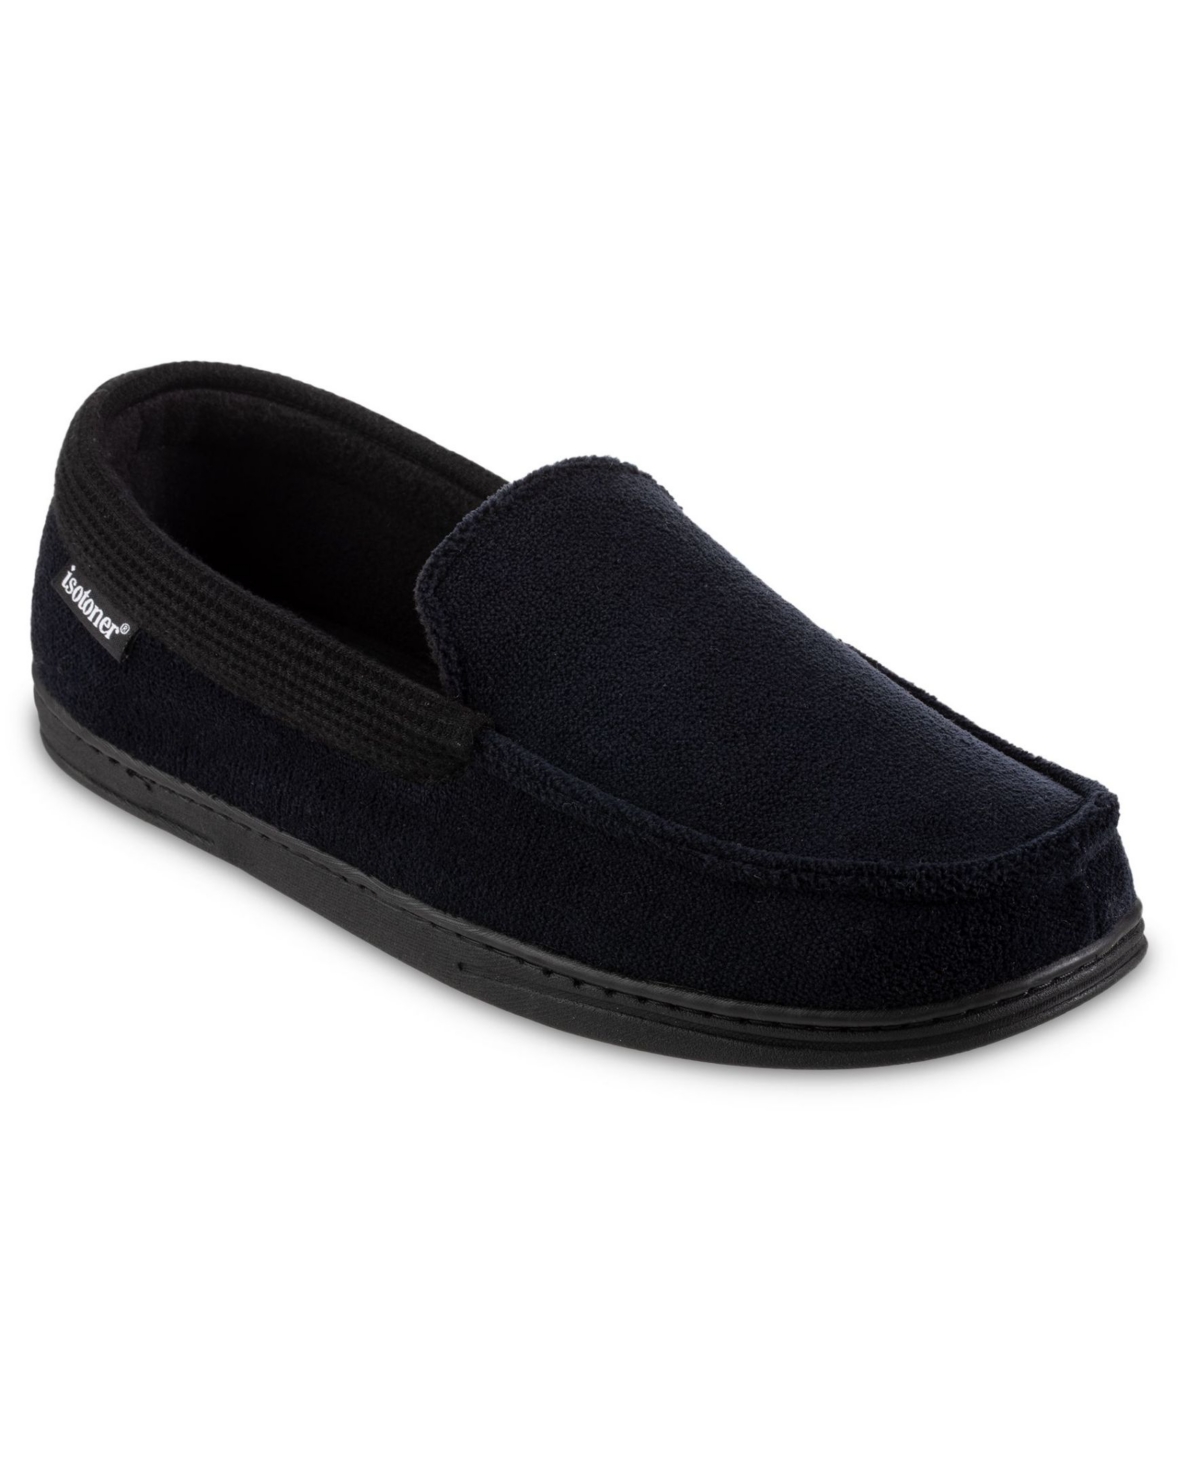 Signature Men's Microterry and Waffle Travis Moccasin Slippers - Navy Blue